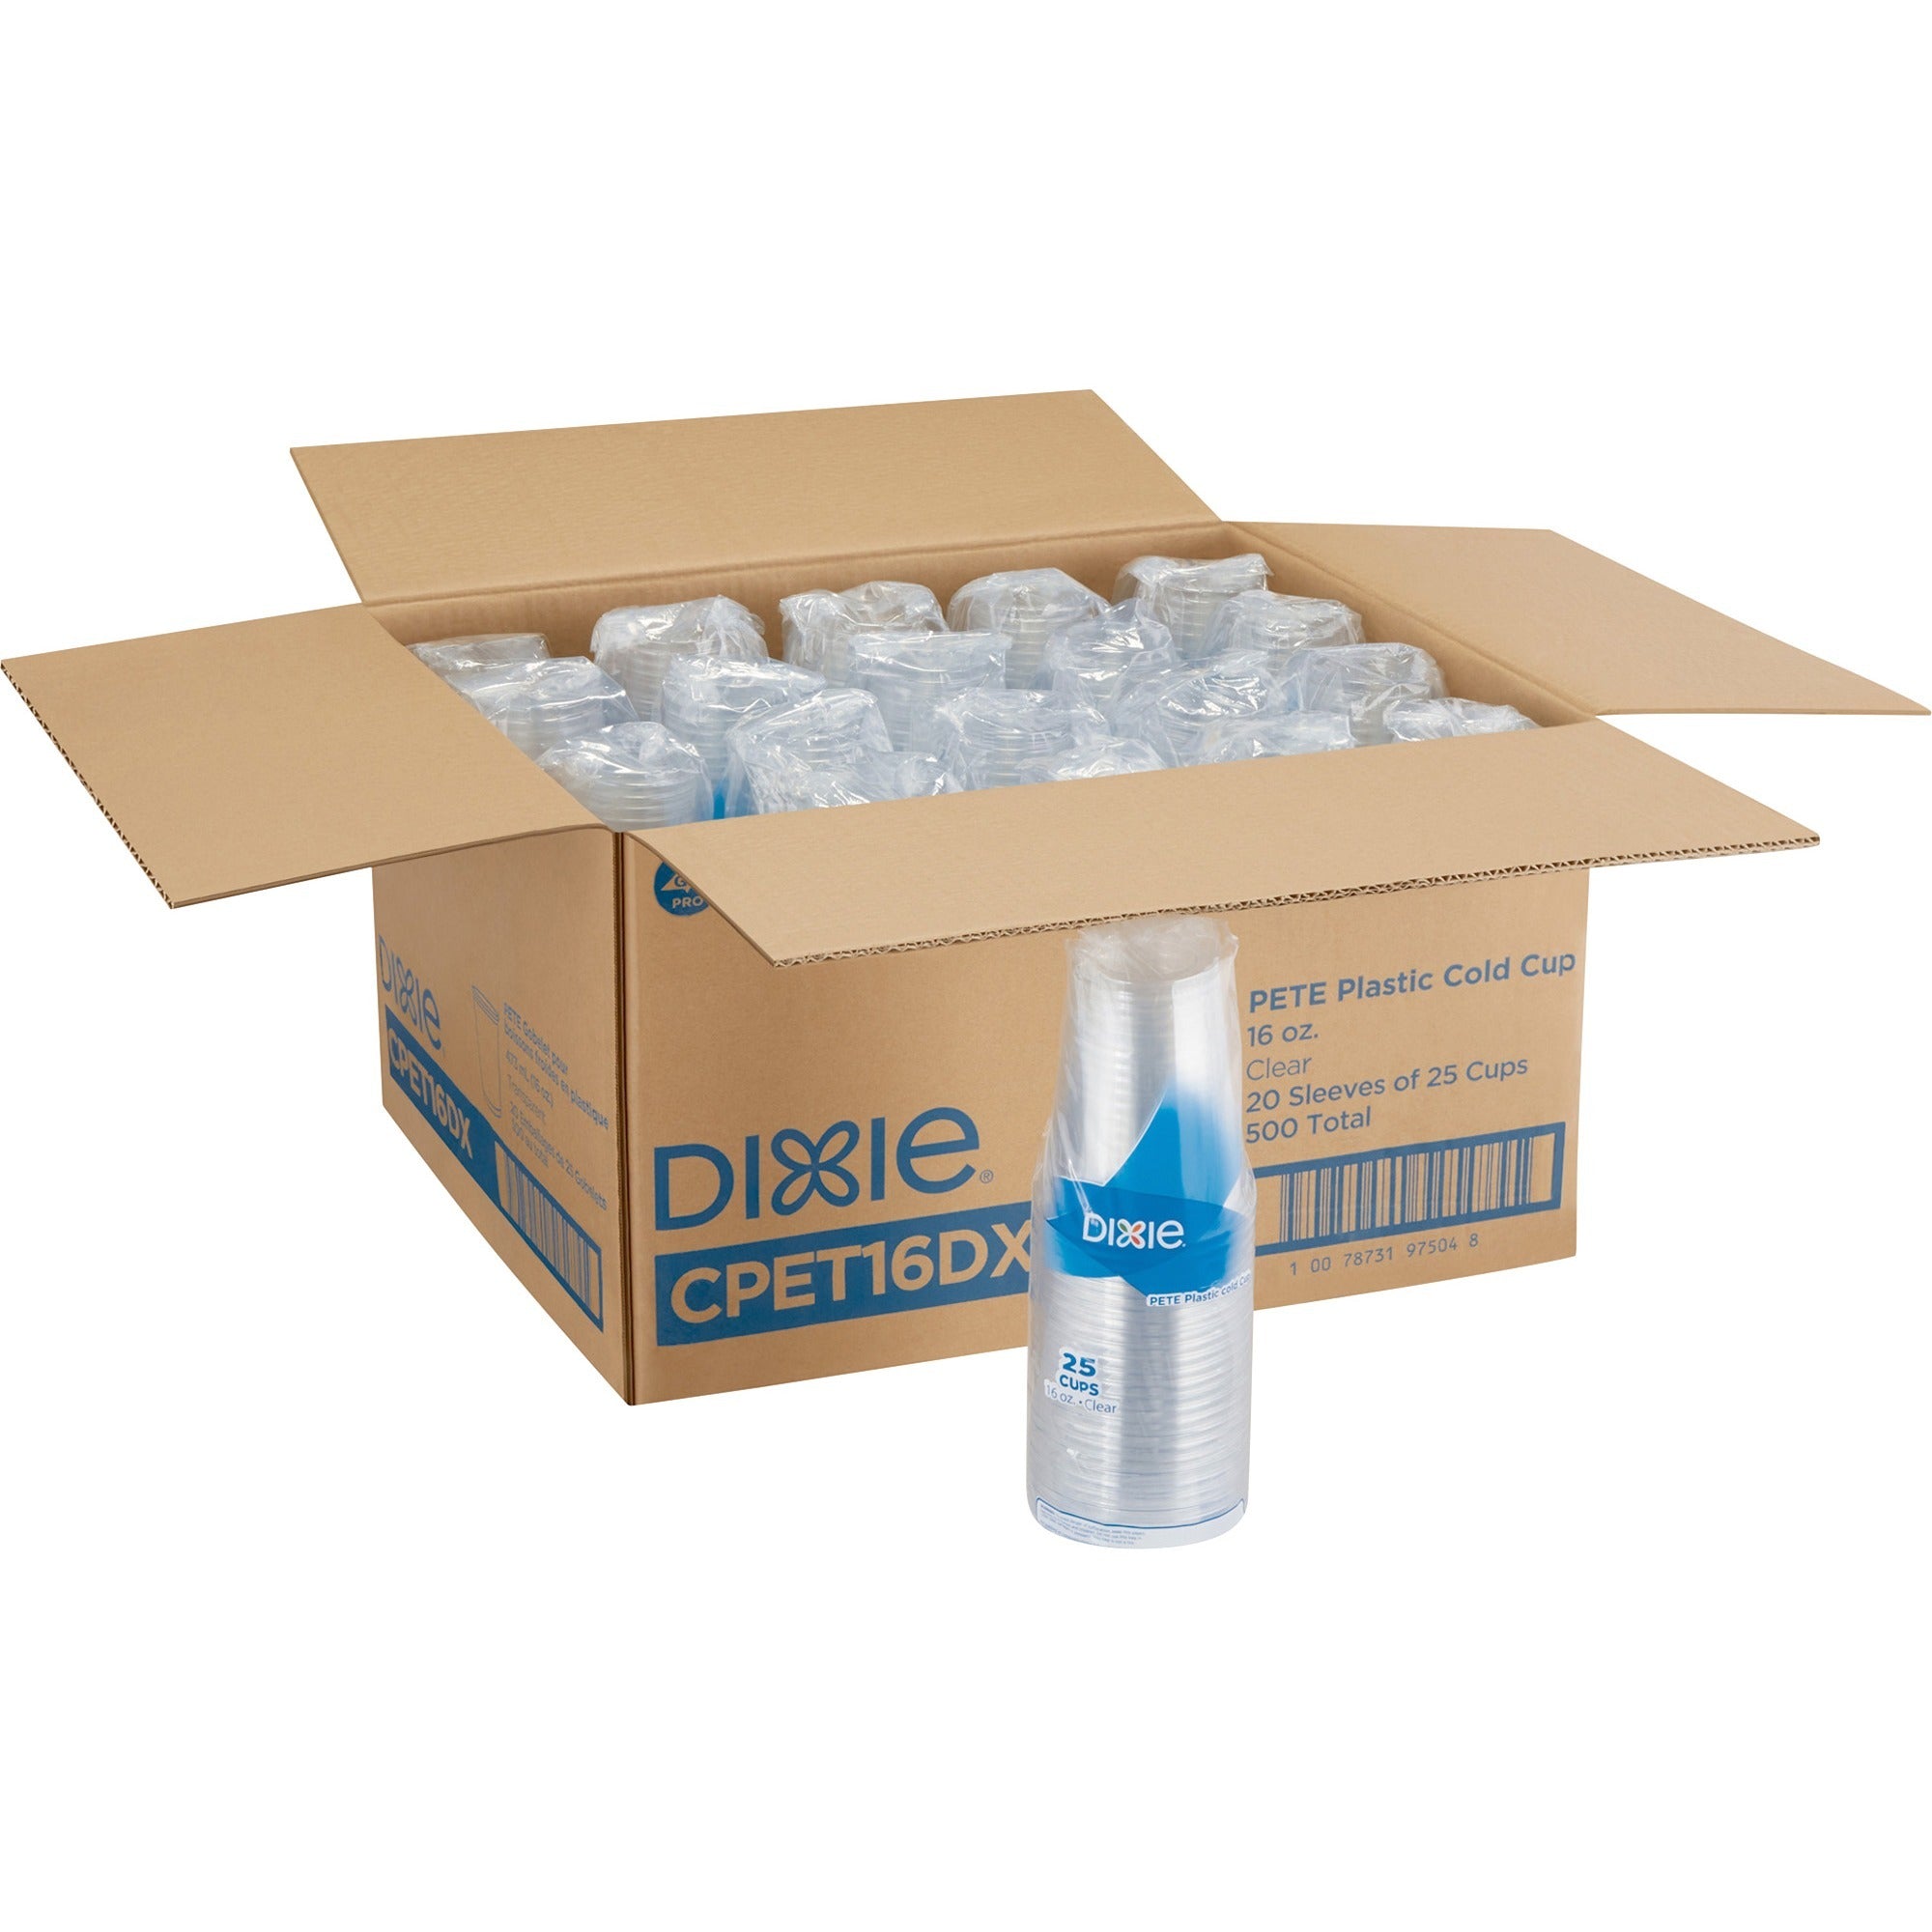 dixie-16-oz-cold-cups-by-gp-pro-25-pack-20-carton-clear-pete-plastic-coffee-shop-soda-sample-iced-coffee-restaurant-breakroom-lobby-beverage-cold-drink_dxecpet16dxct - 1